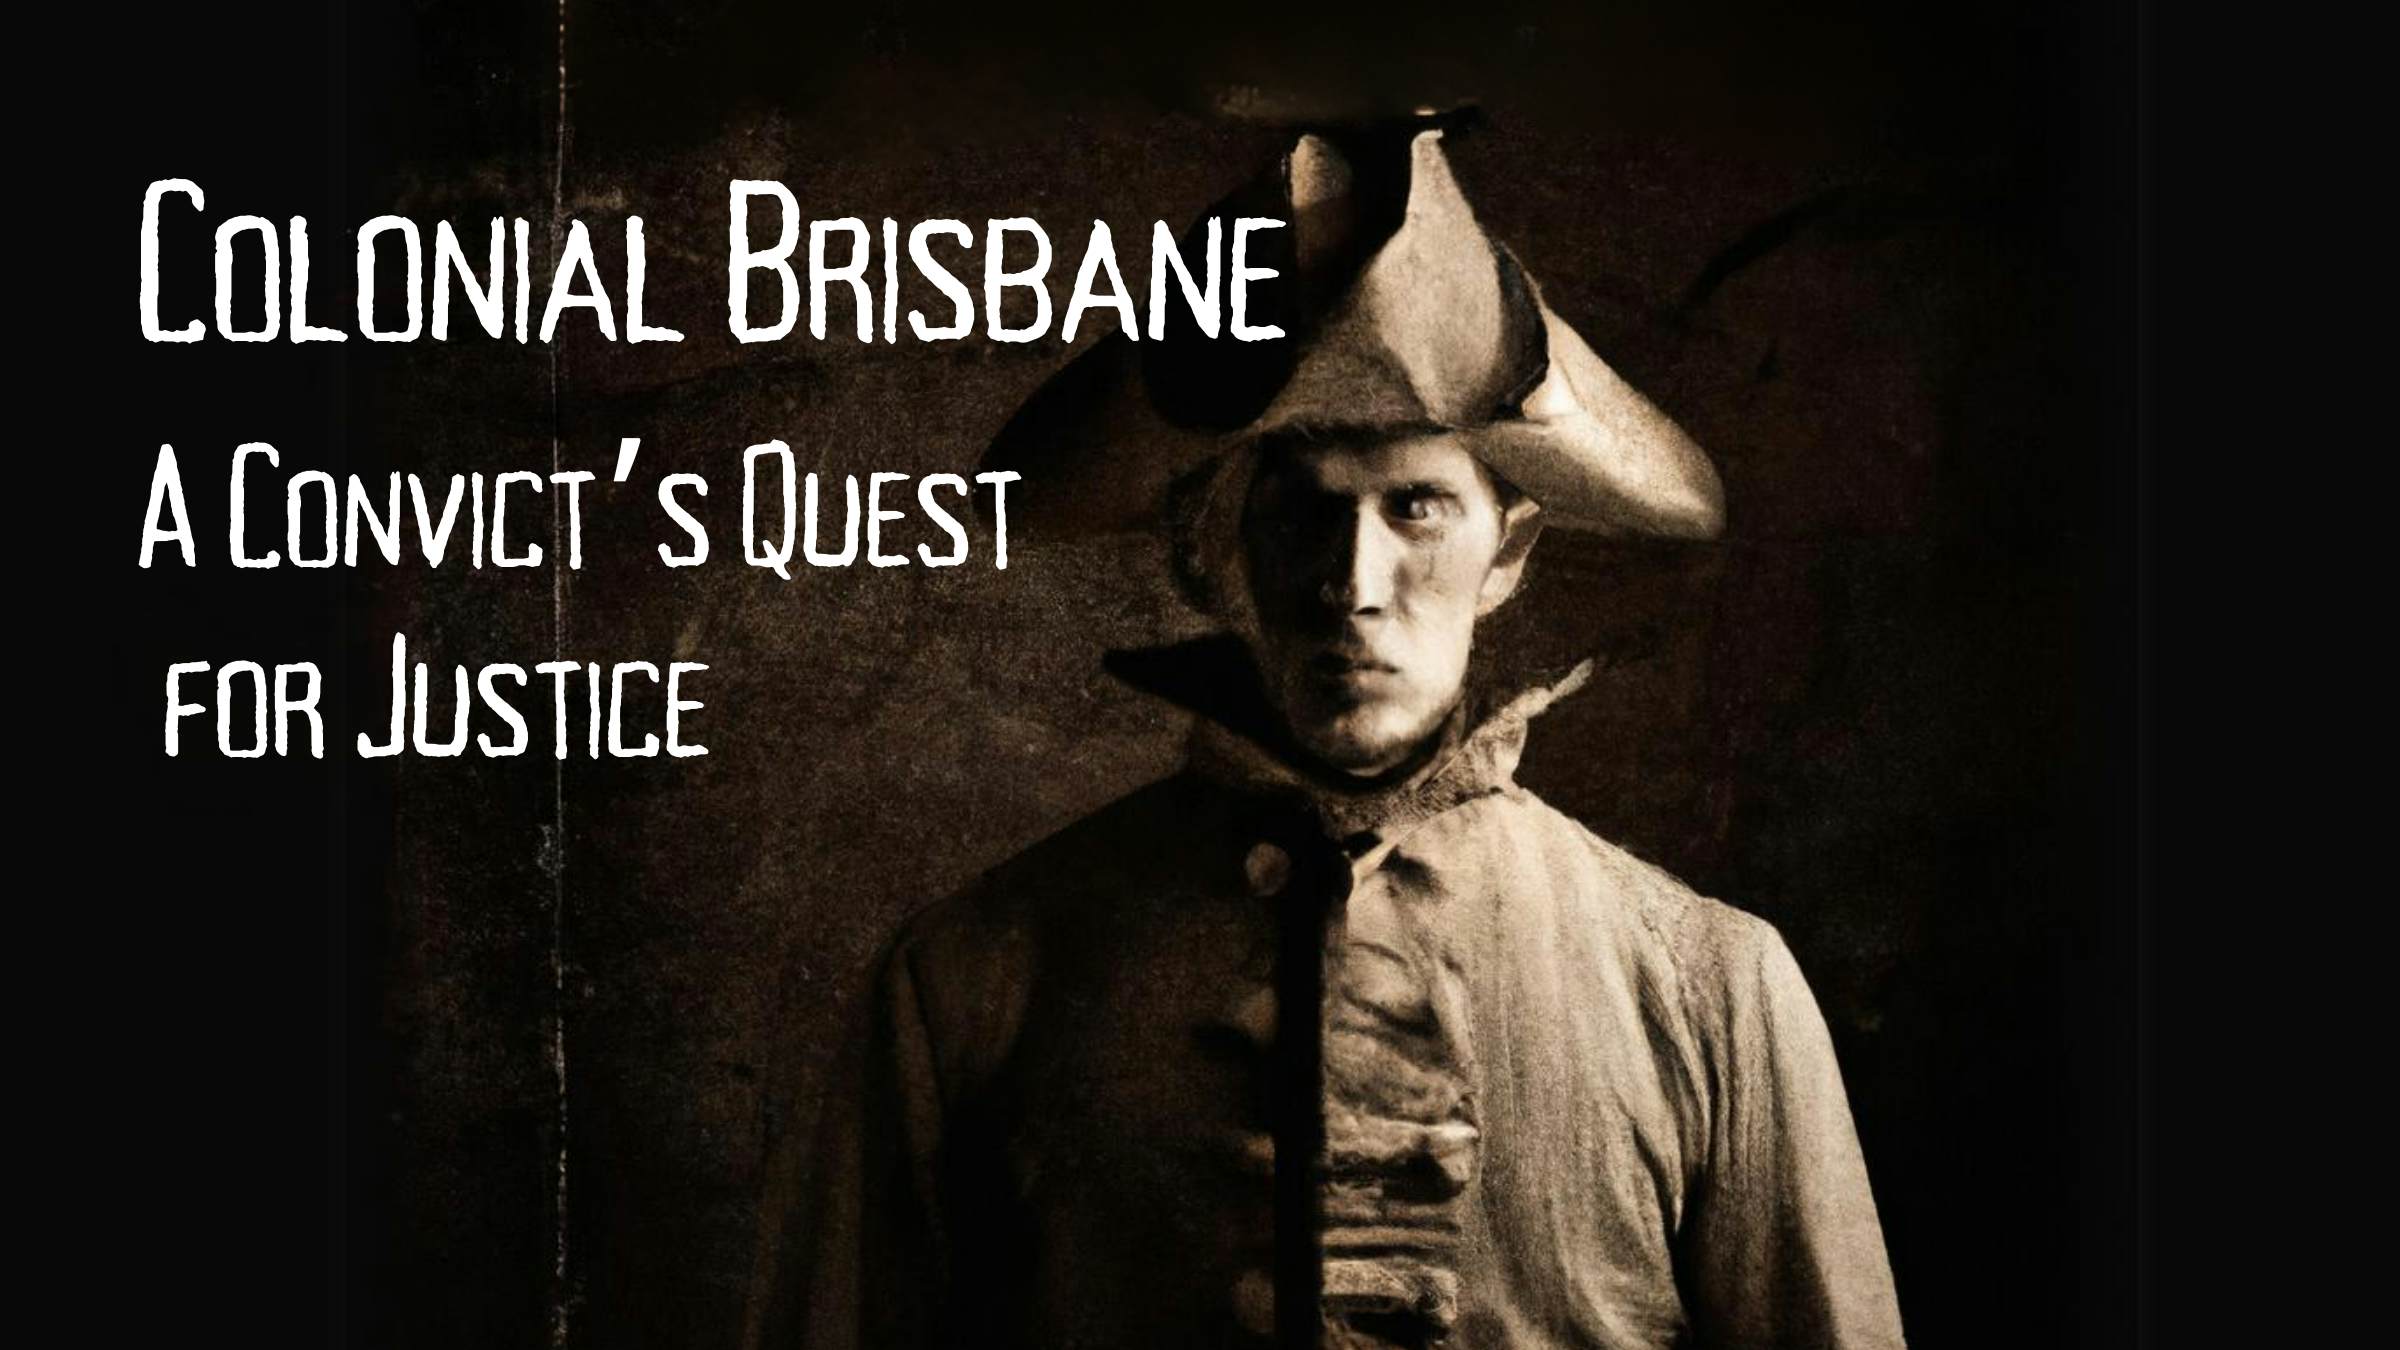 Colonial Brisbane: A Convict's Quest for Justice